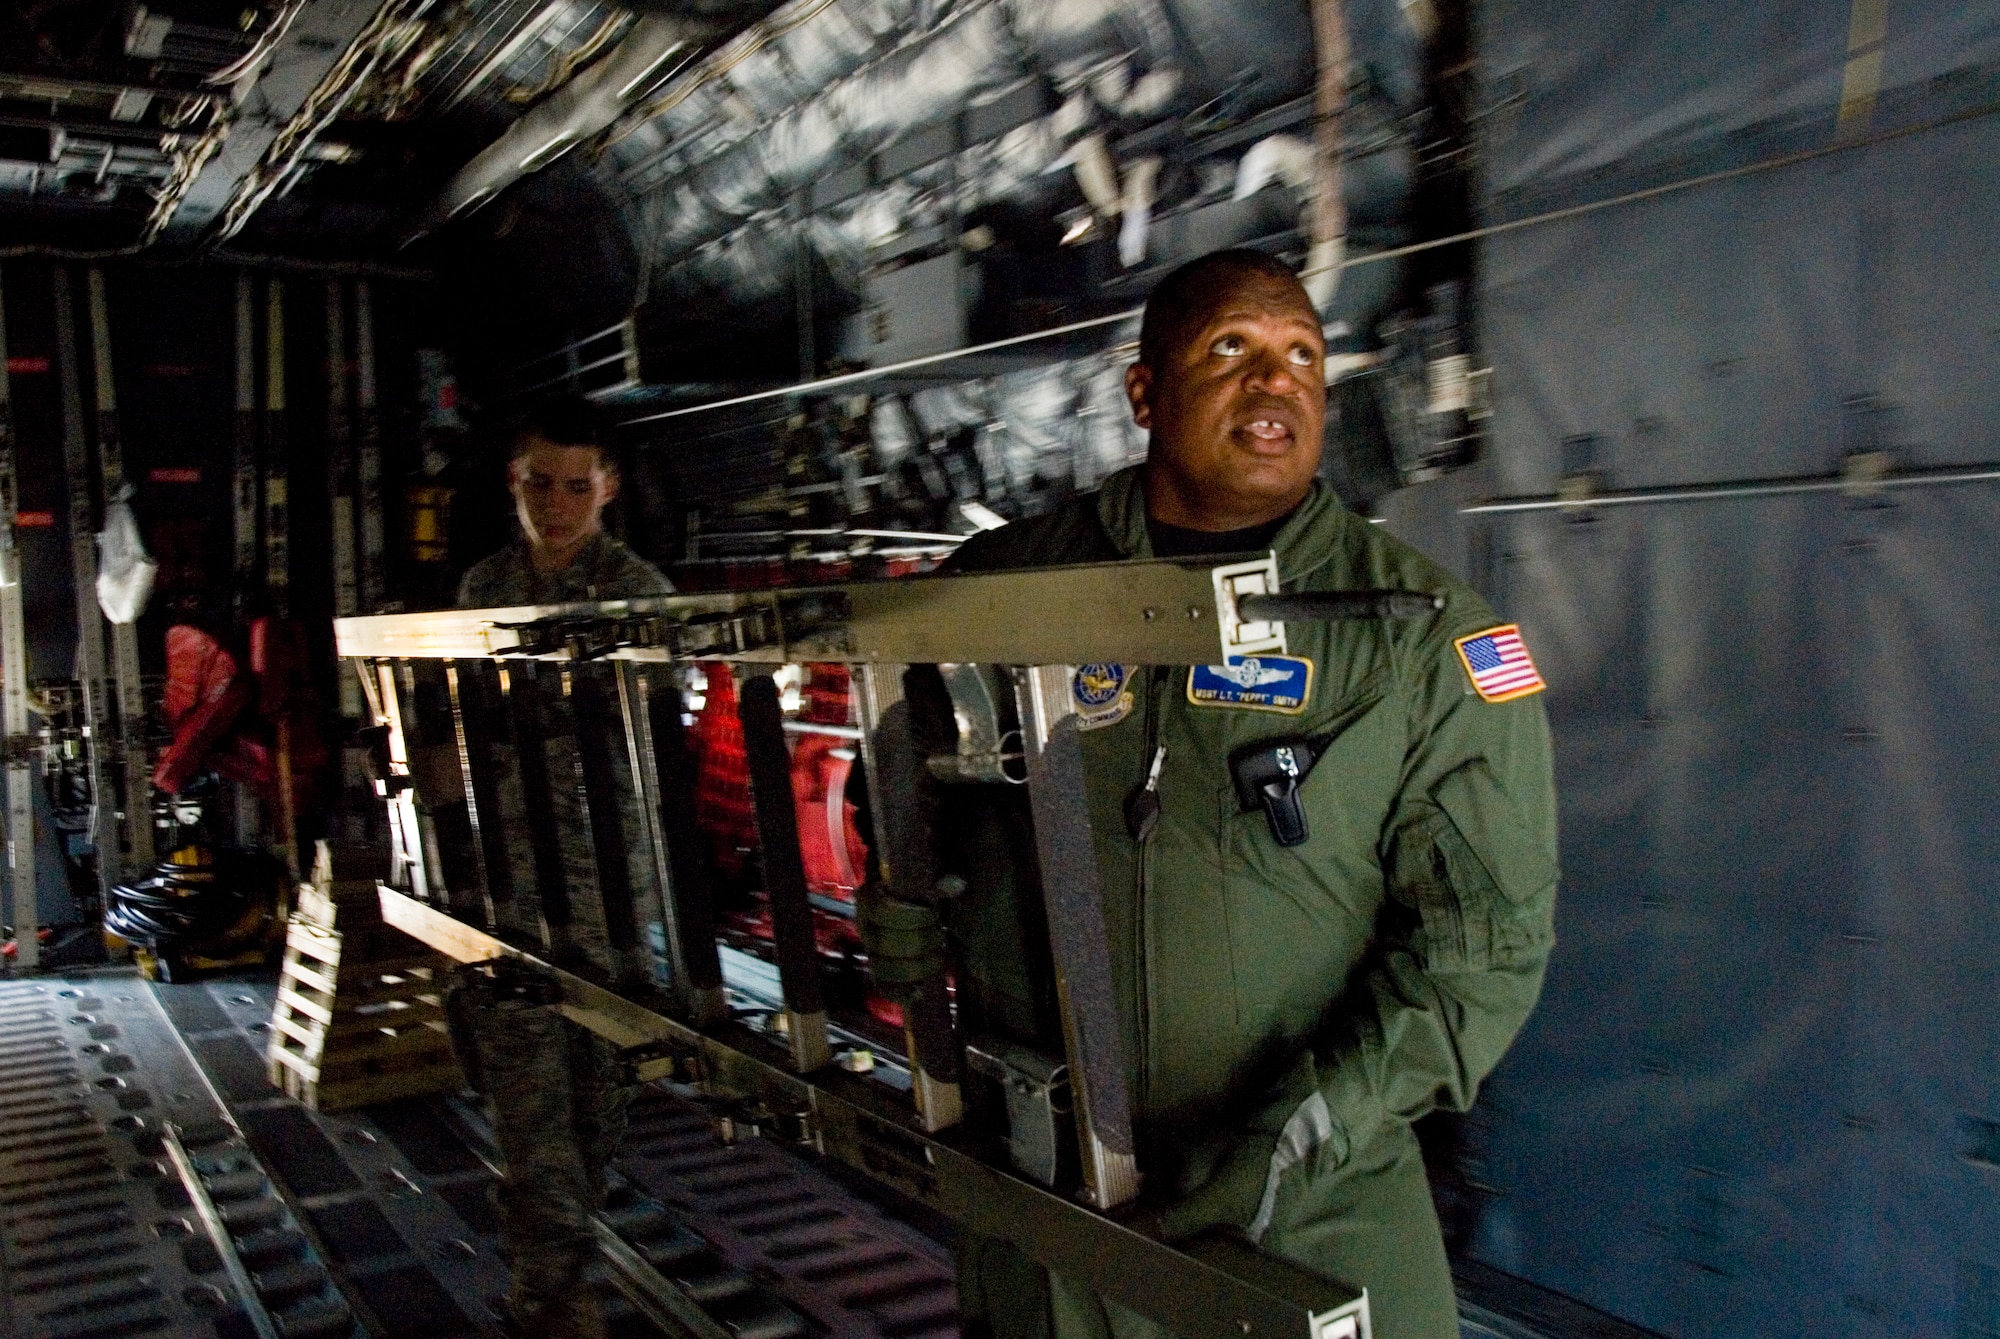 Master Sgt. L.T. “Peppy” Smith, a flight examiner for the 167th Aeromedical Evacuation Squadron, and Airmen Joseph Robert carry a ladder through a C-130 aircraft during an egress training session at the 167th Airlift Wing, West Virginia Air National Guard. The 167th AW secured the C-130, which was headed to the “bone yard” at Davis-Monthan Air Force Base, and will convert it to a training simulator for the base. (U.S. Air Force photo by Master Sgt Emily Beightol-Deyerle)